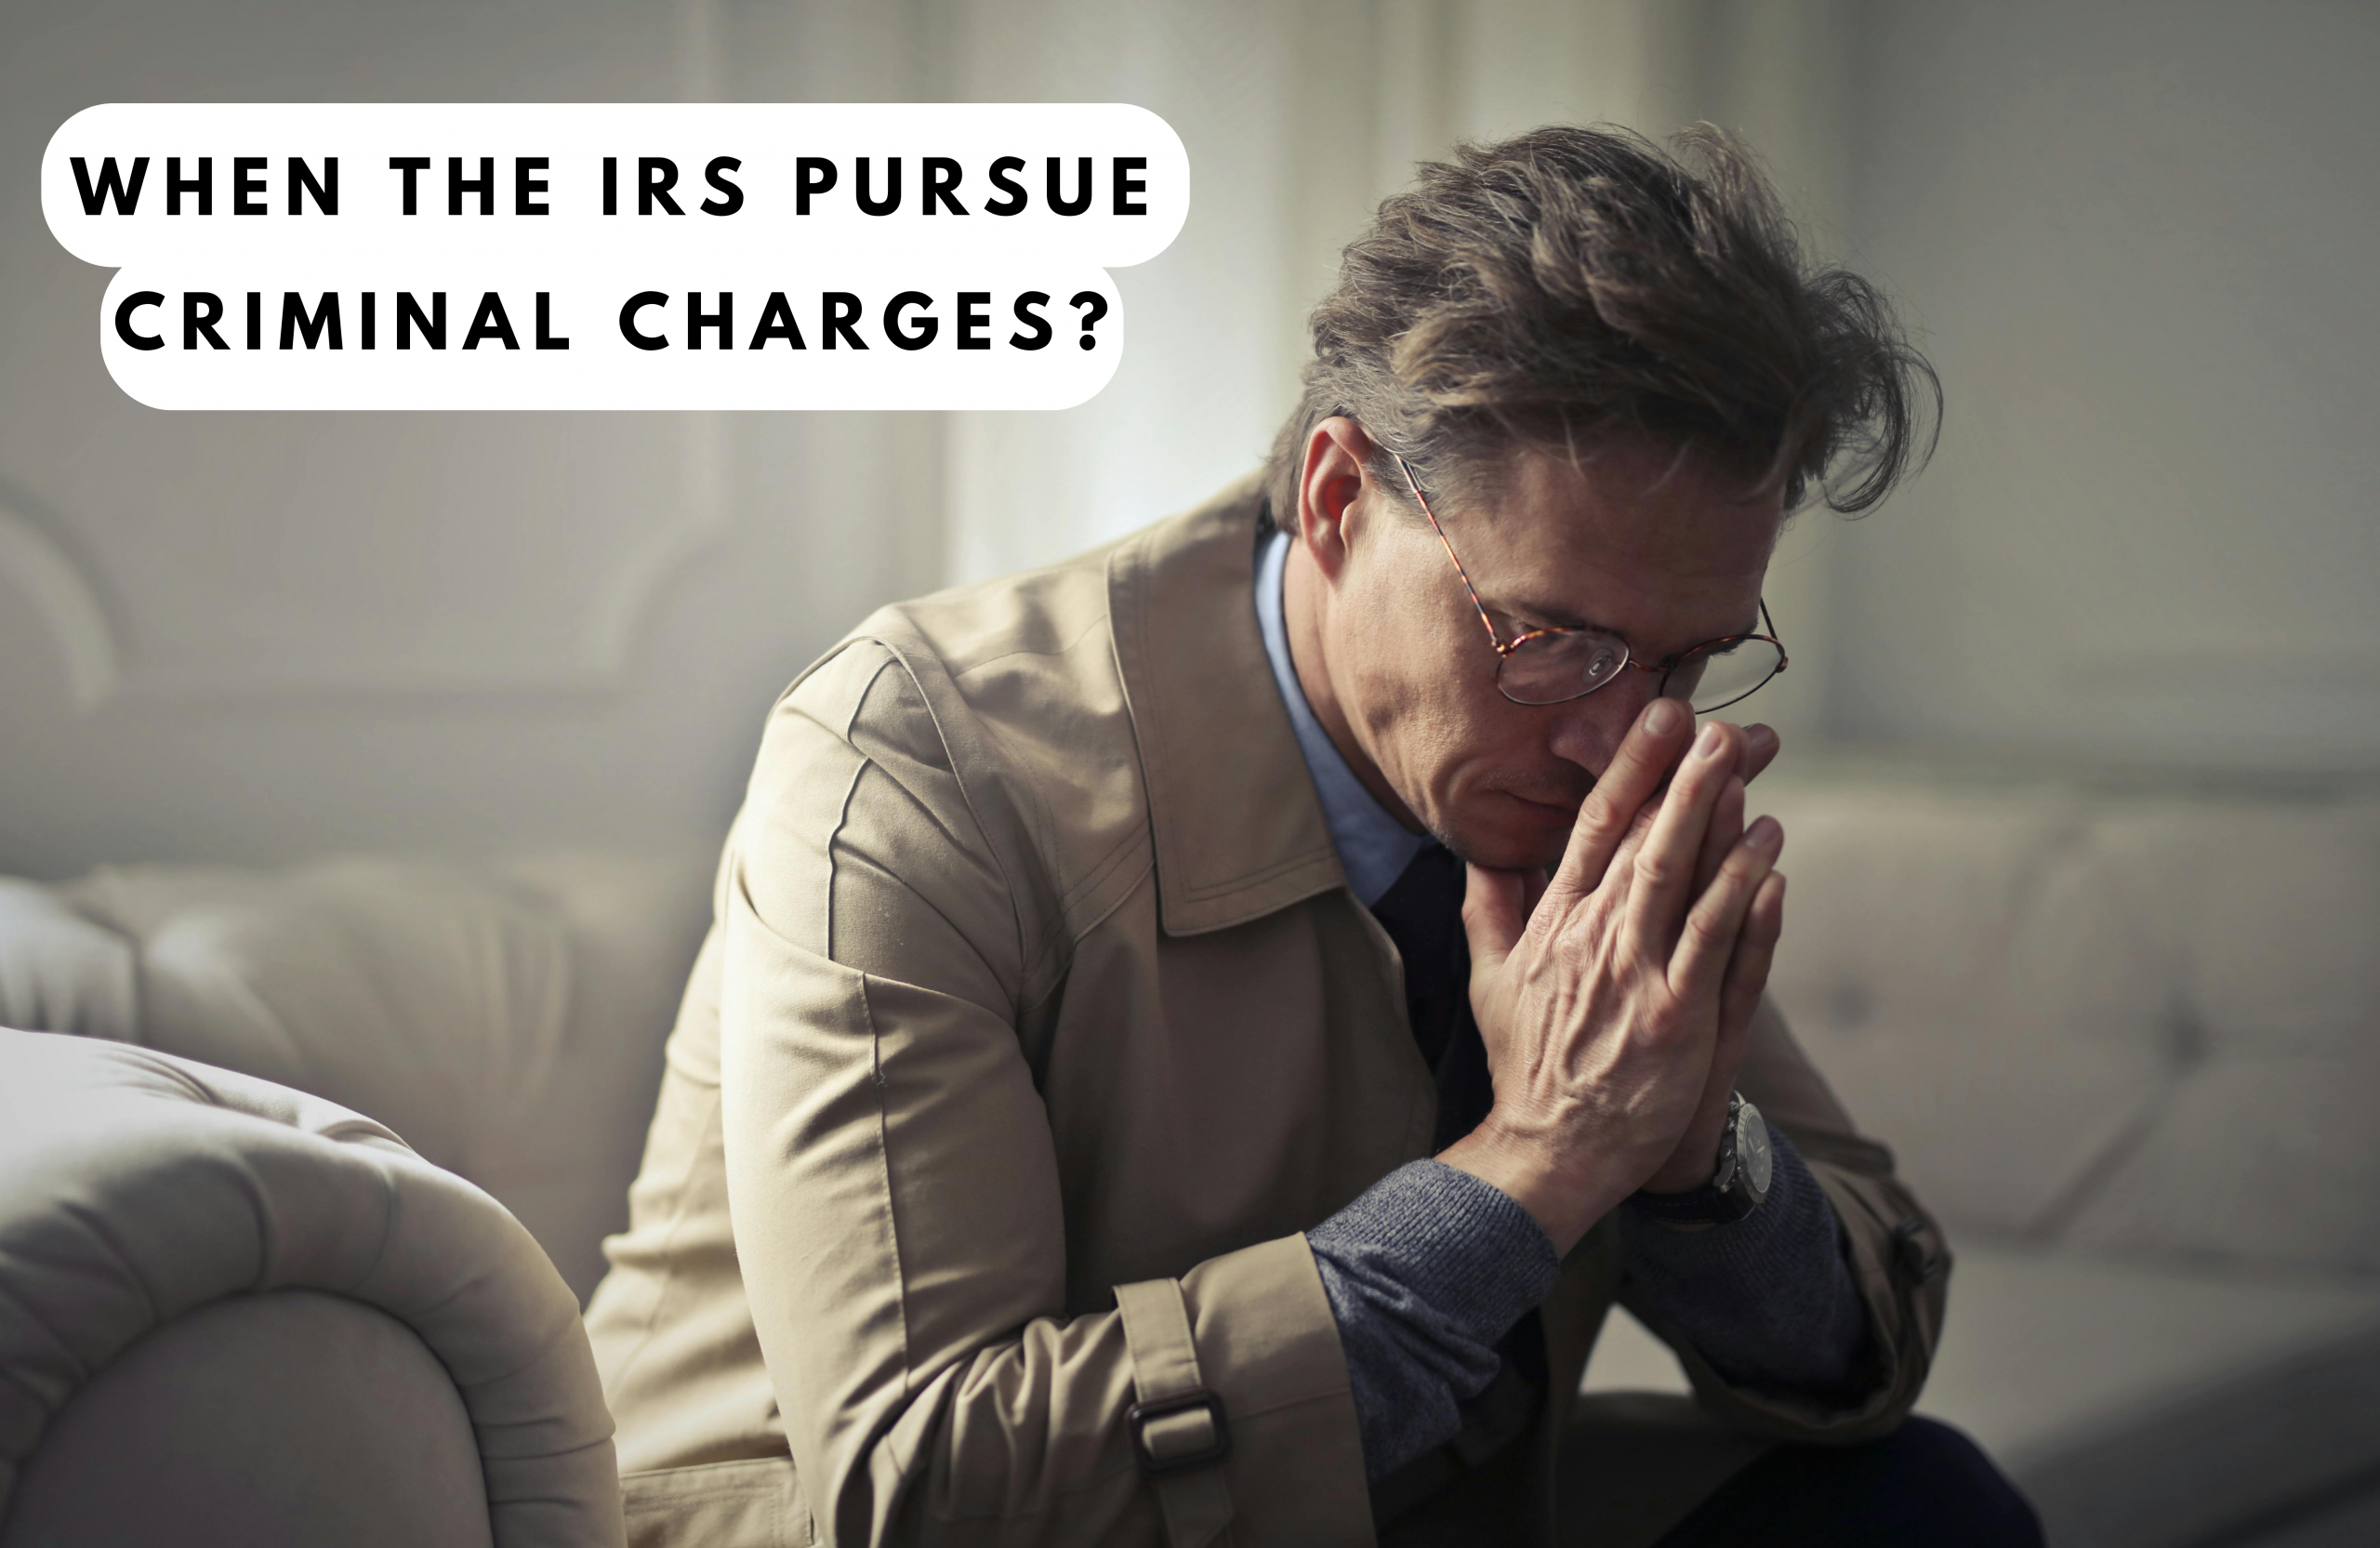 When the IRS Pursues Criminal Charges: Things You Need to Know